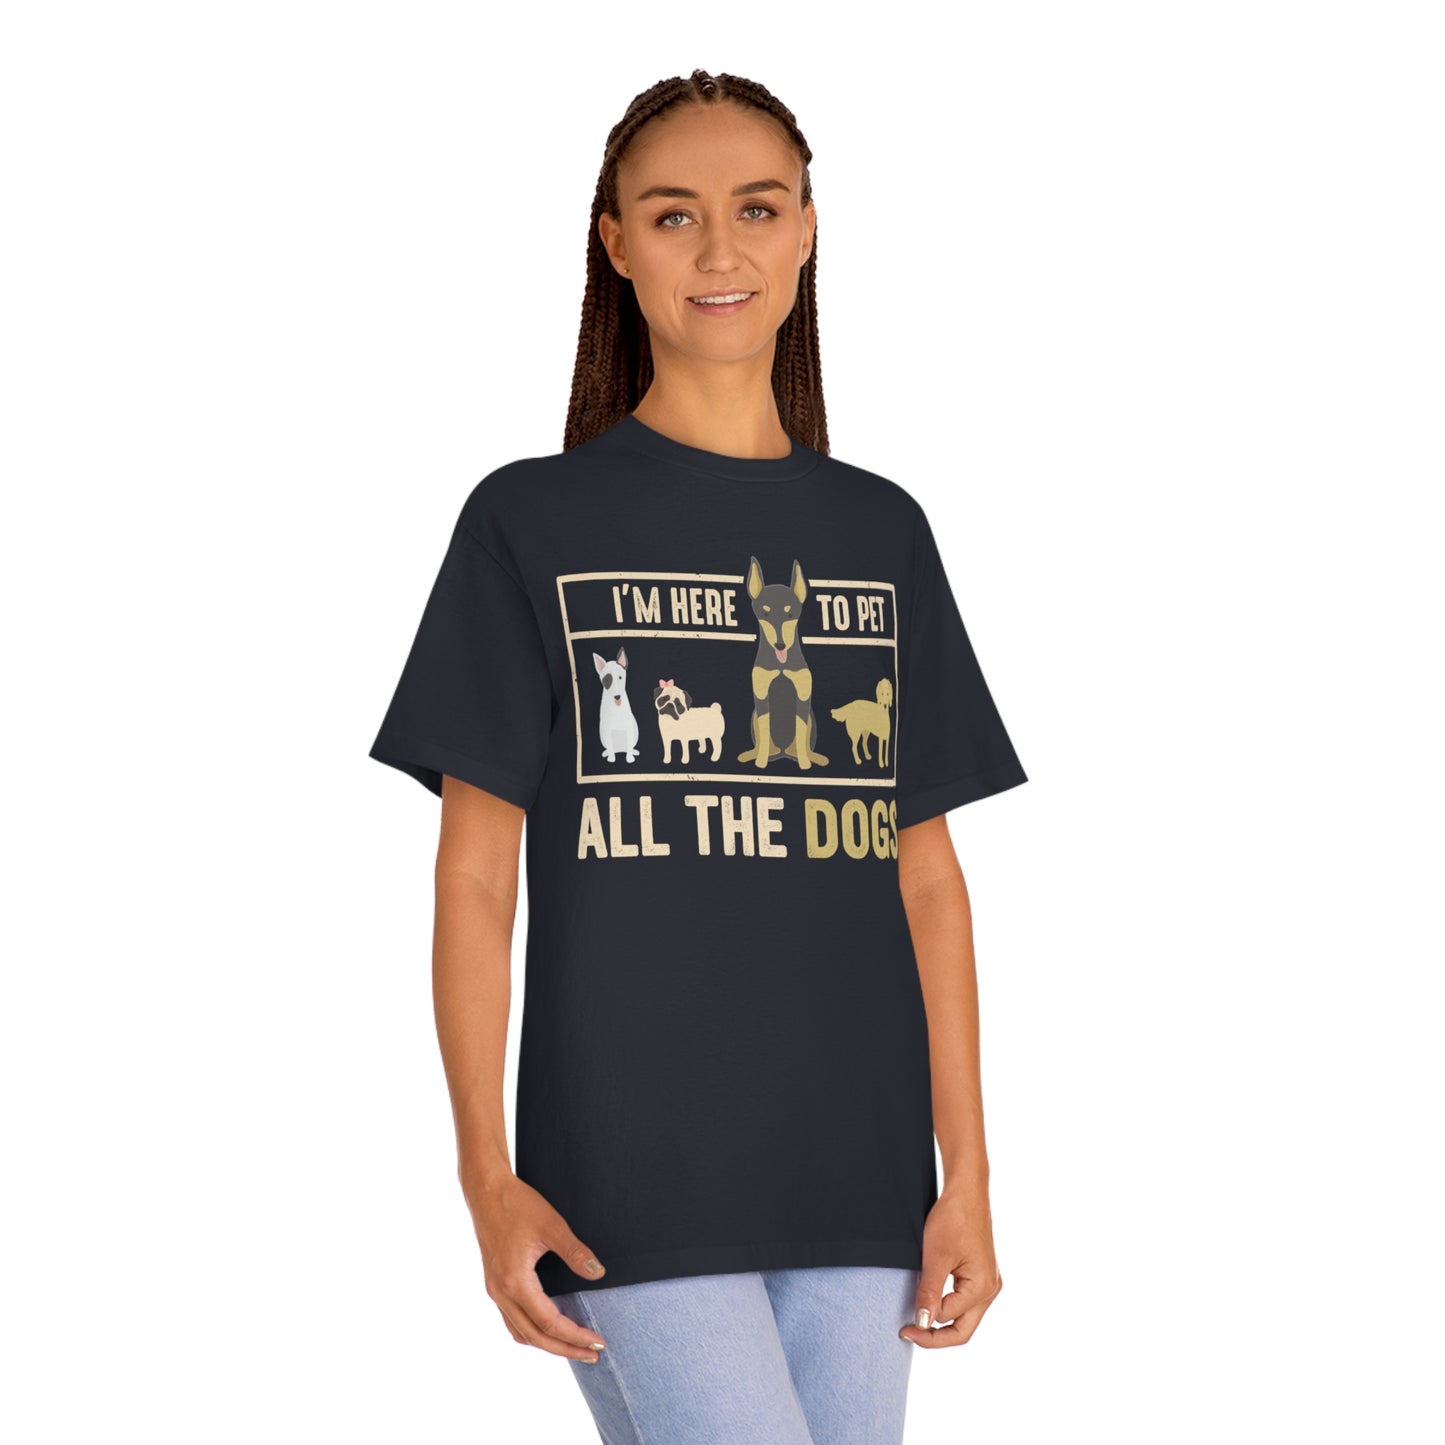 I am here to pet all the dogs Unisex Classic Tee